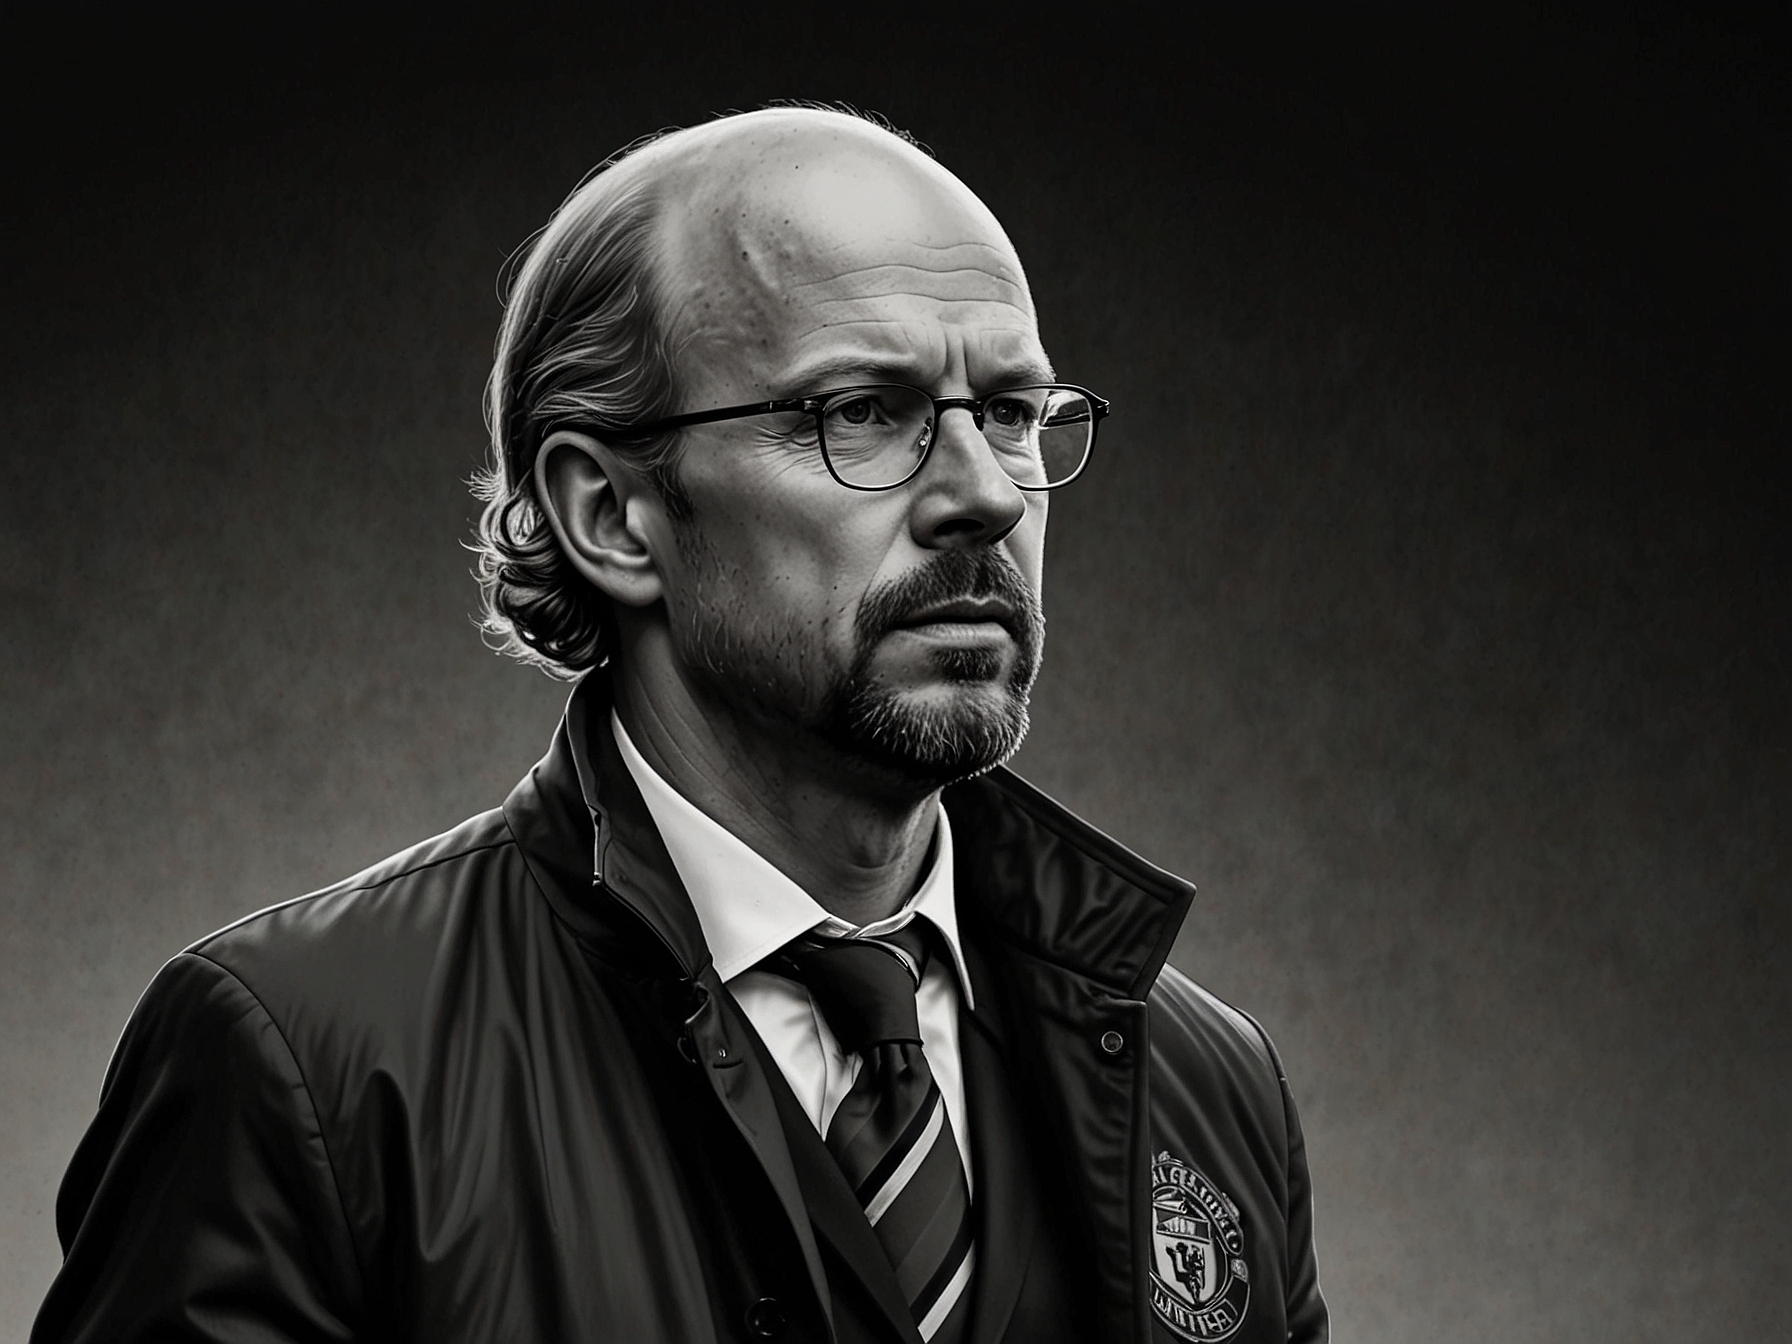 An illustration of Manchester United's manager Erik ten Hag strategizing for the summer transfer window, emphasizing the importance of acquiring high-profile signings like the £51m Dutch star.